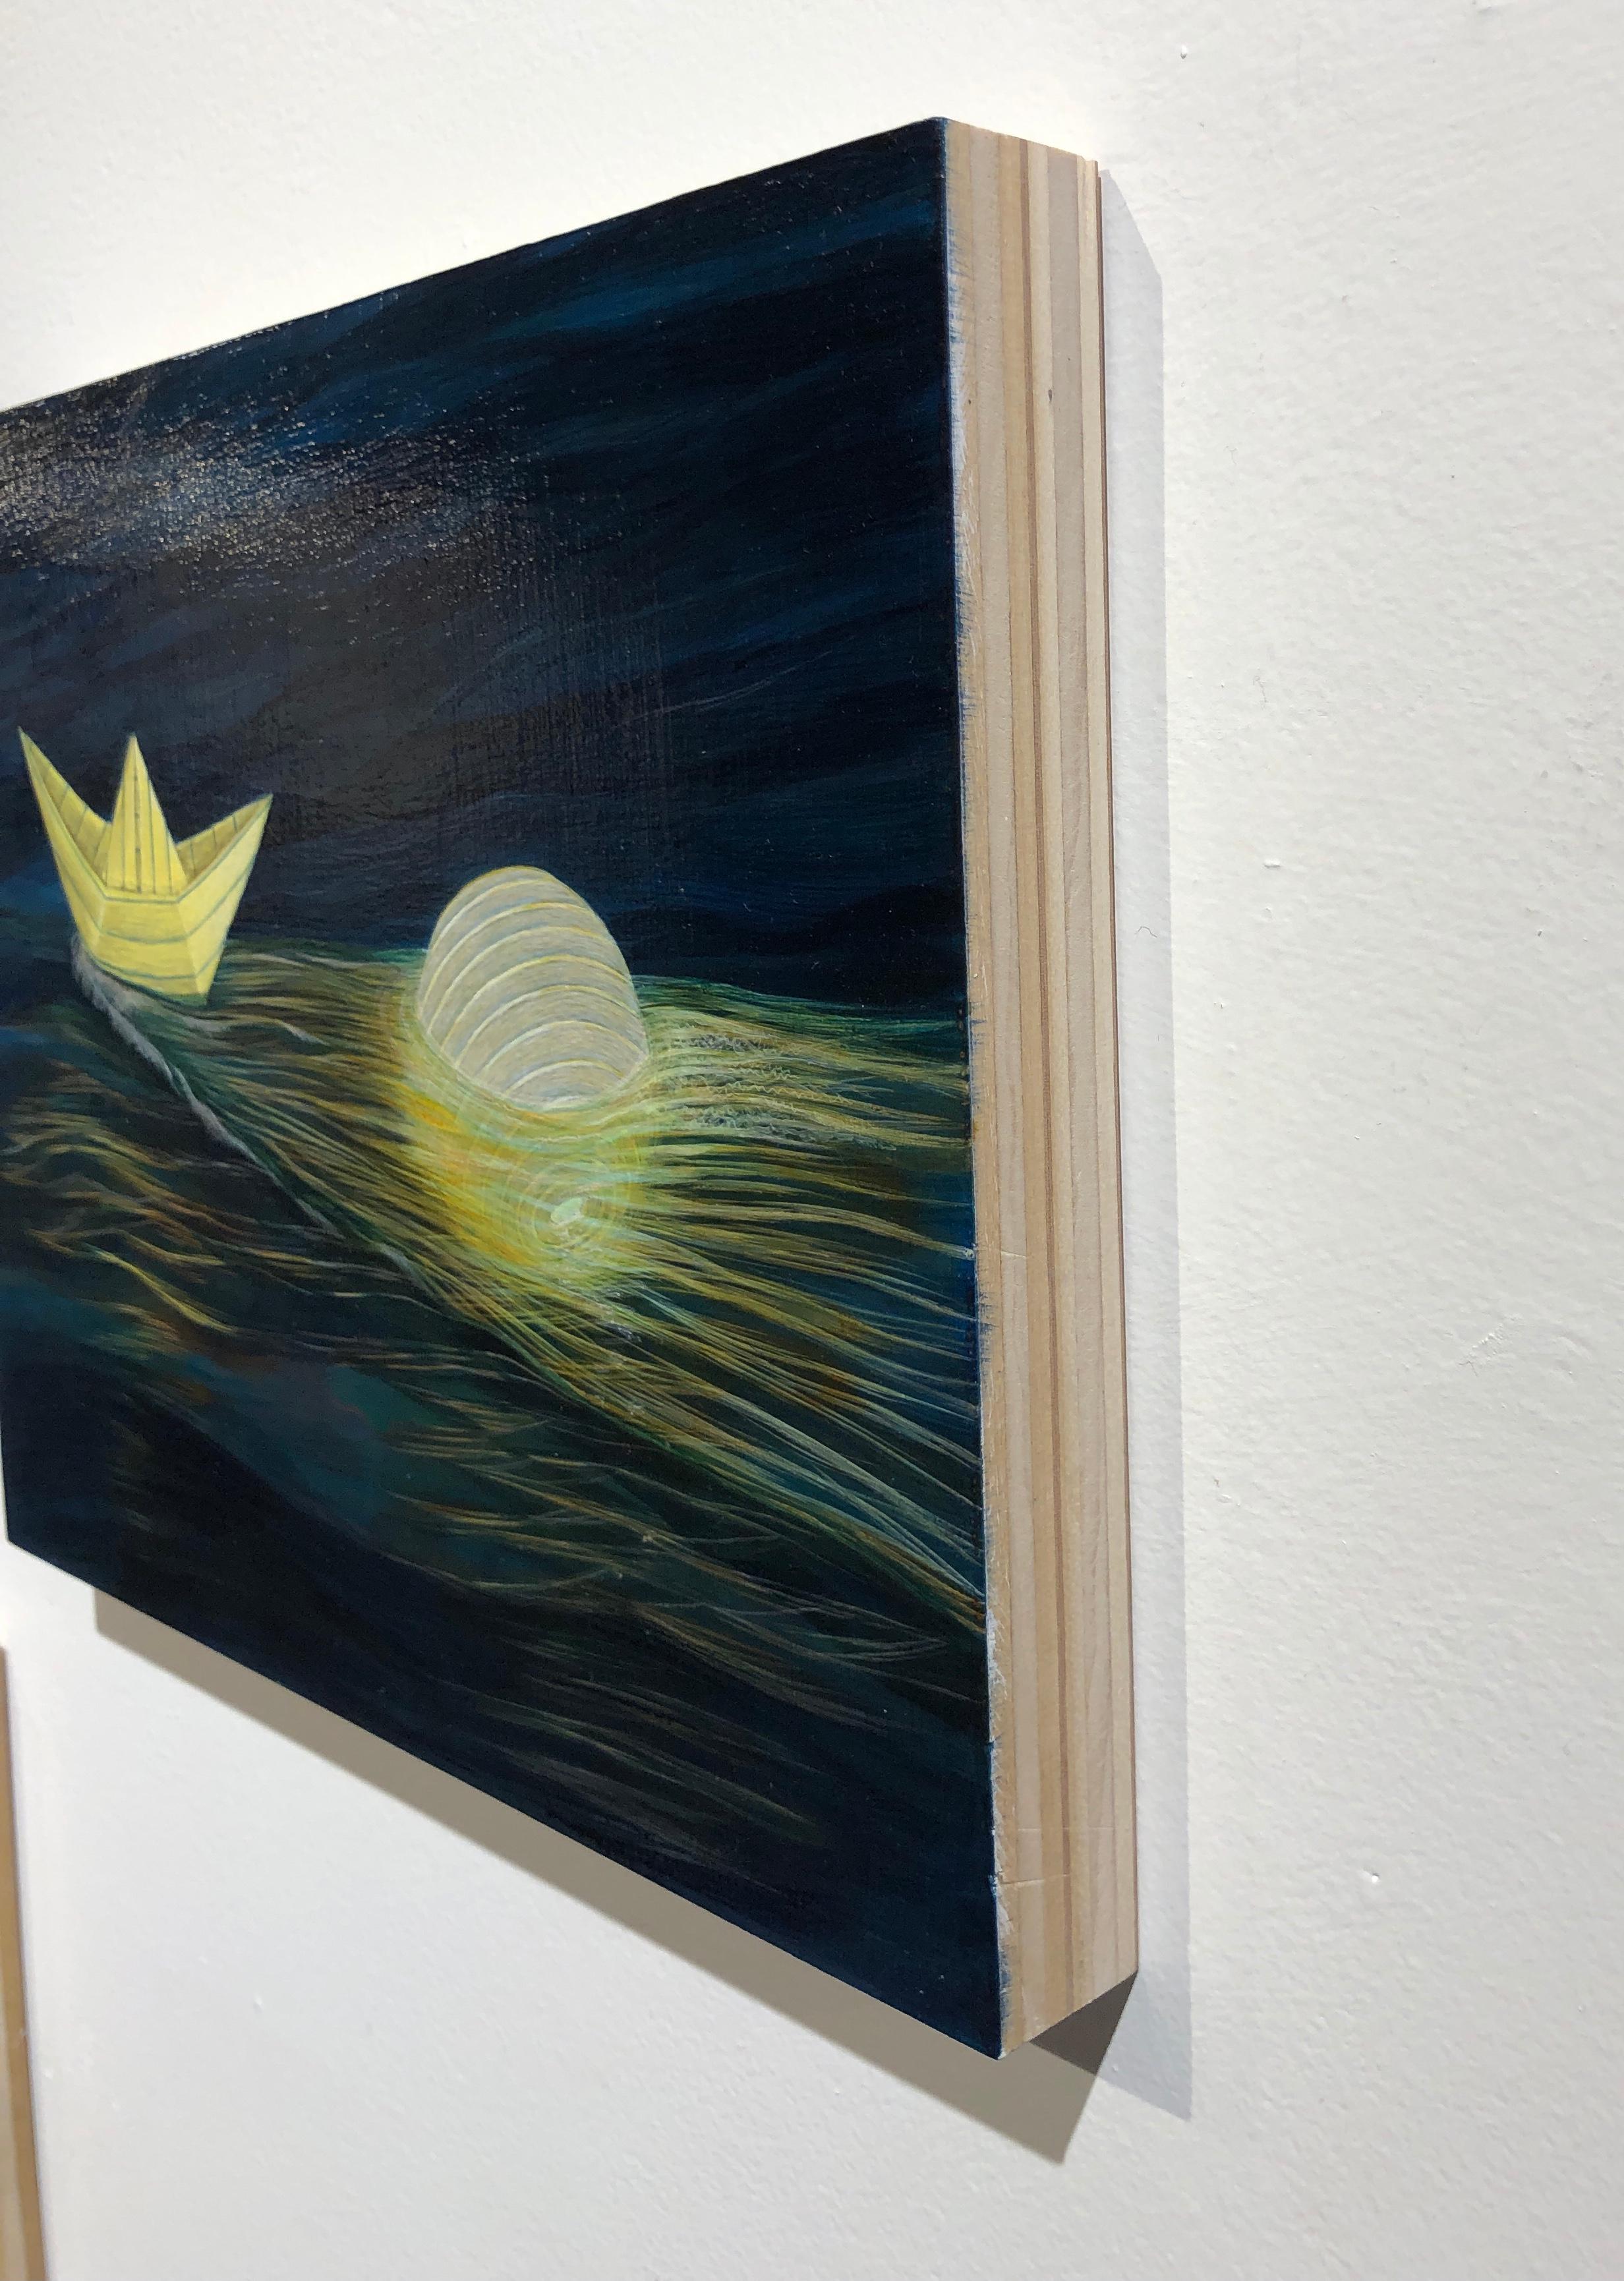 Paper Boat - An Illuminated Paper Boat and a Paper Lantern Floating on the Ocean - Black Landscape Painting by Christina Haglid